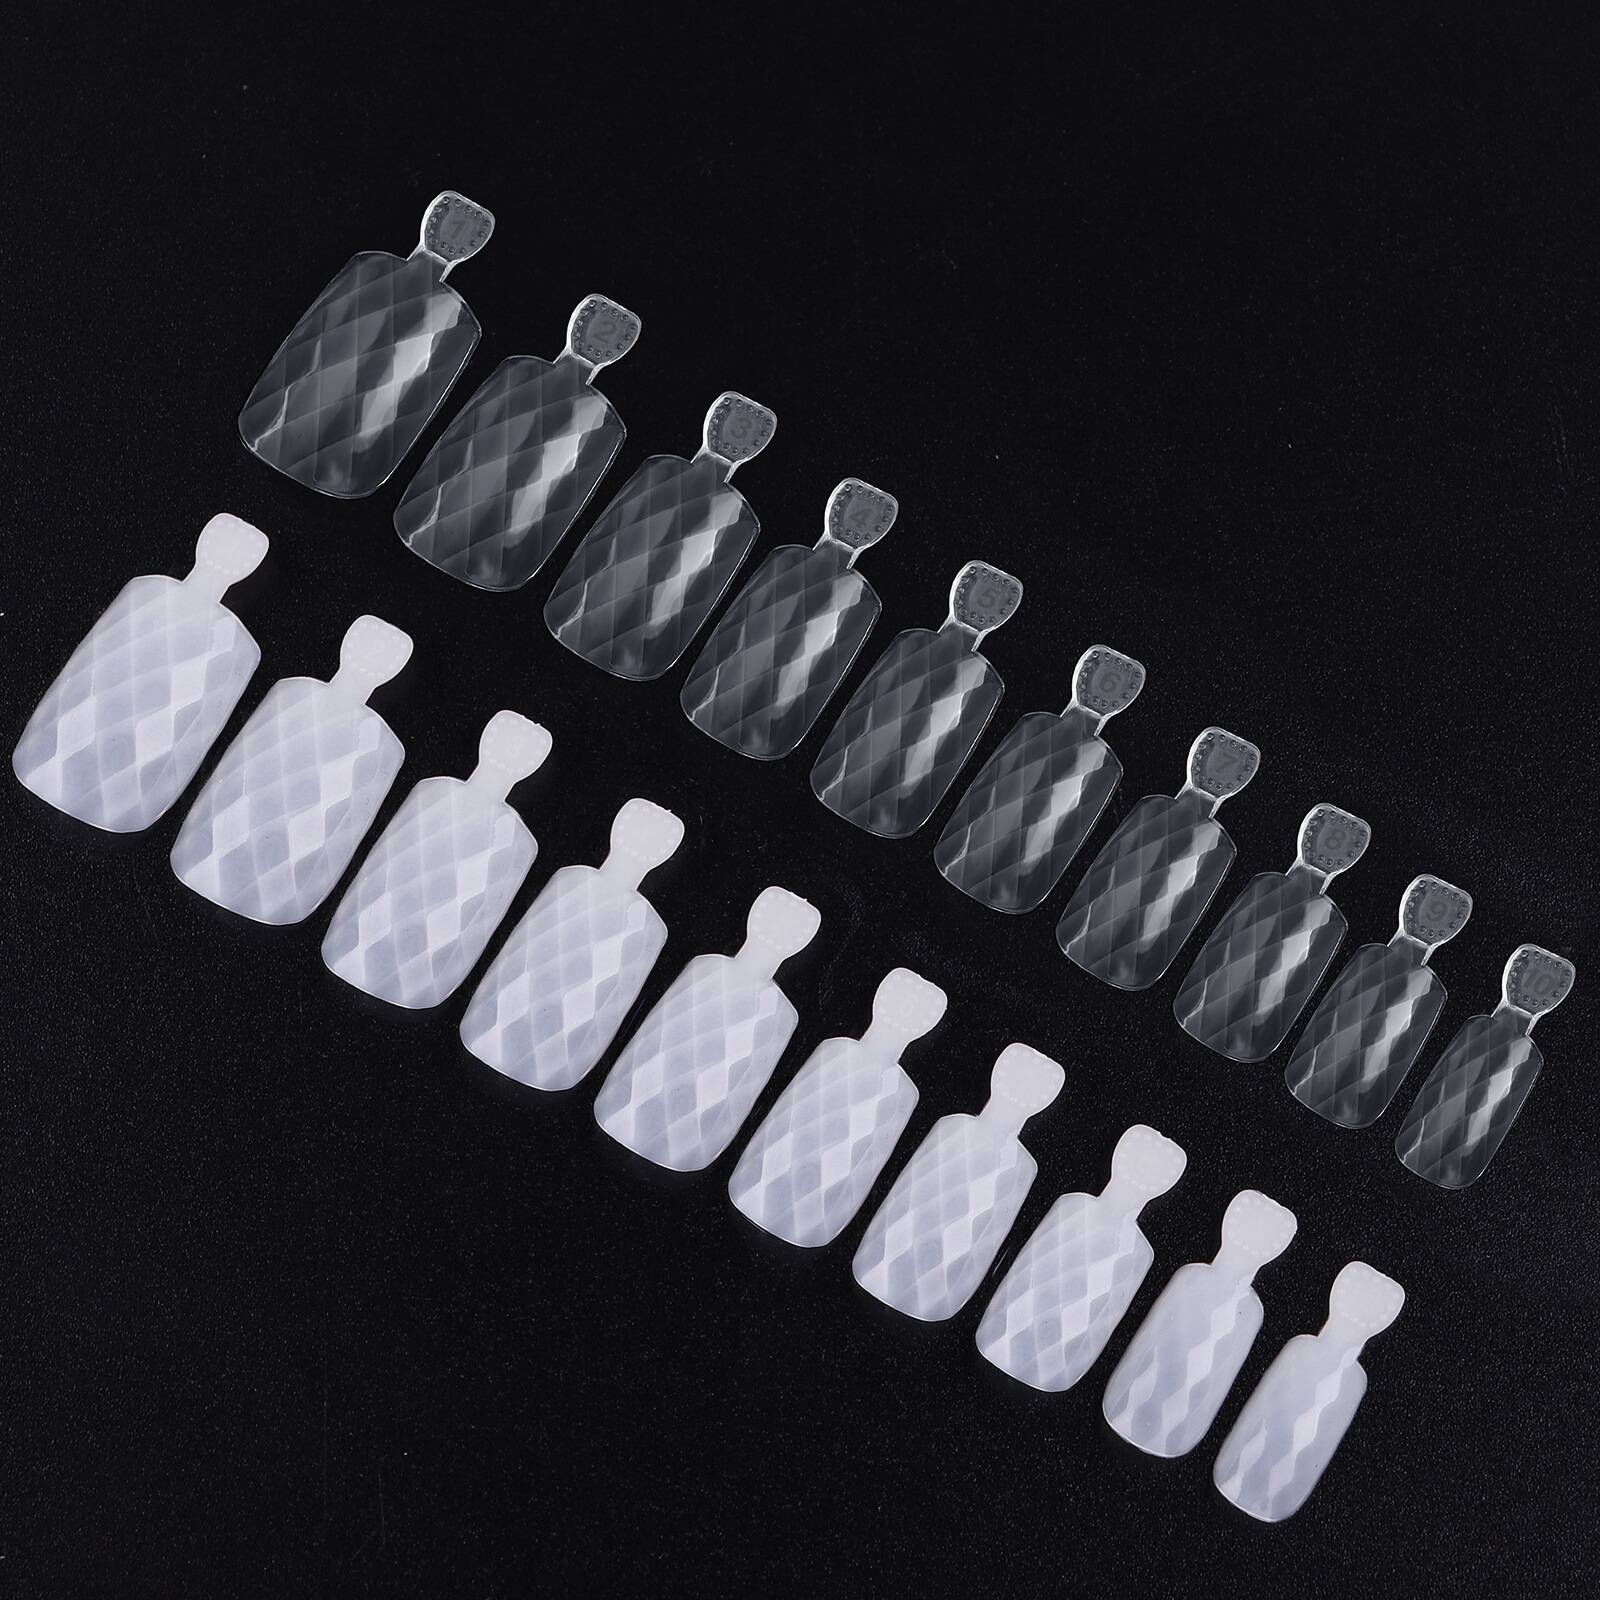 Diamond Clear Nail Tip (50 Tips/Bag - 10 sizes 0 - 9 total 500 Tips)